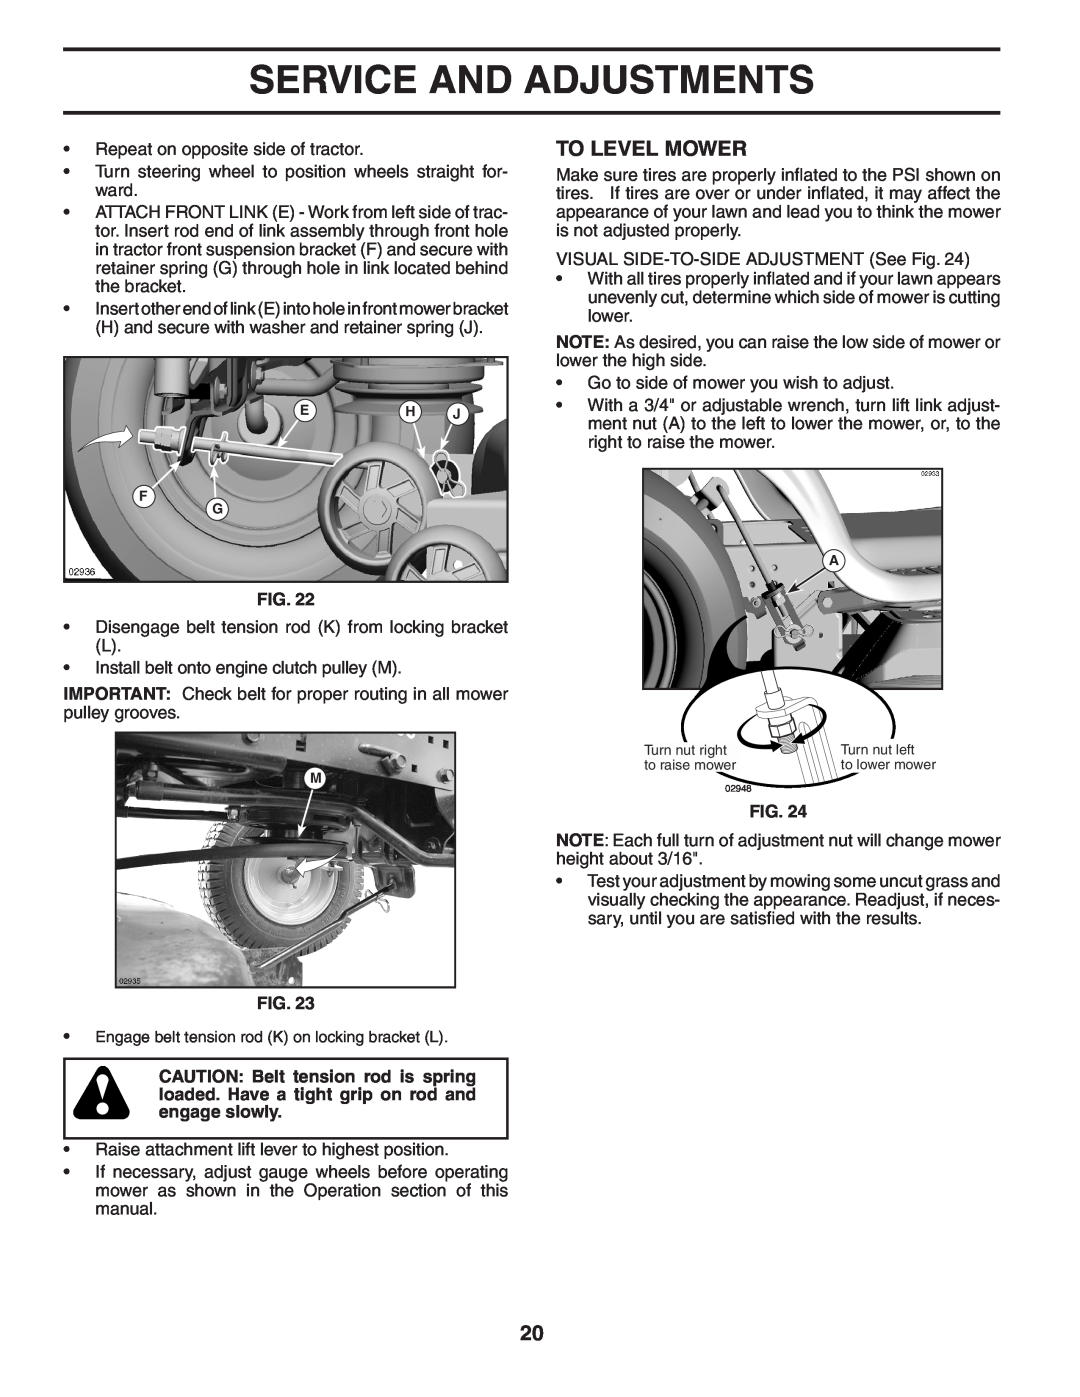 Poulan 404402, 960420022 manual To Level Mower, Service And Adjustments 